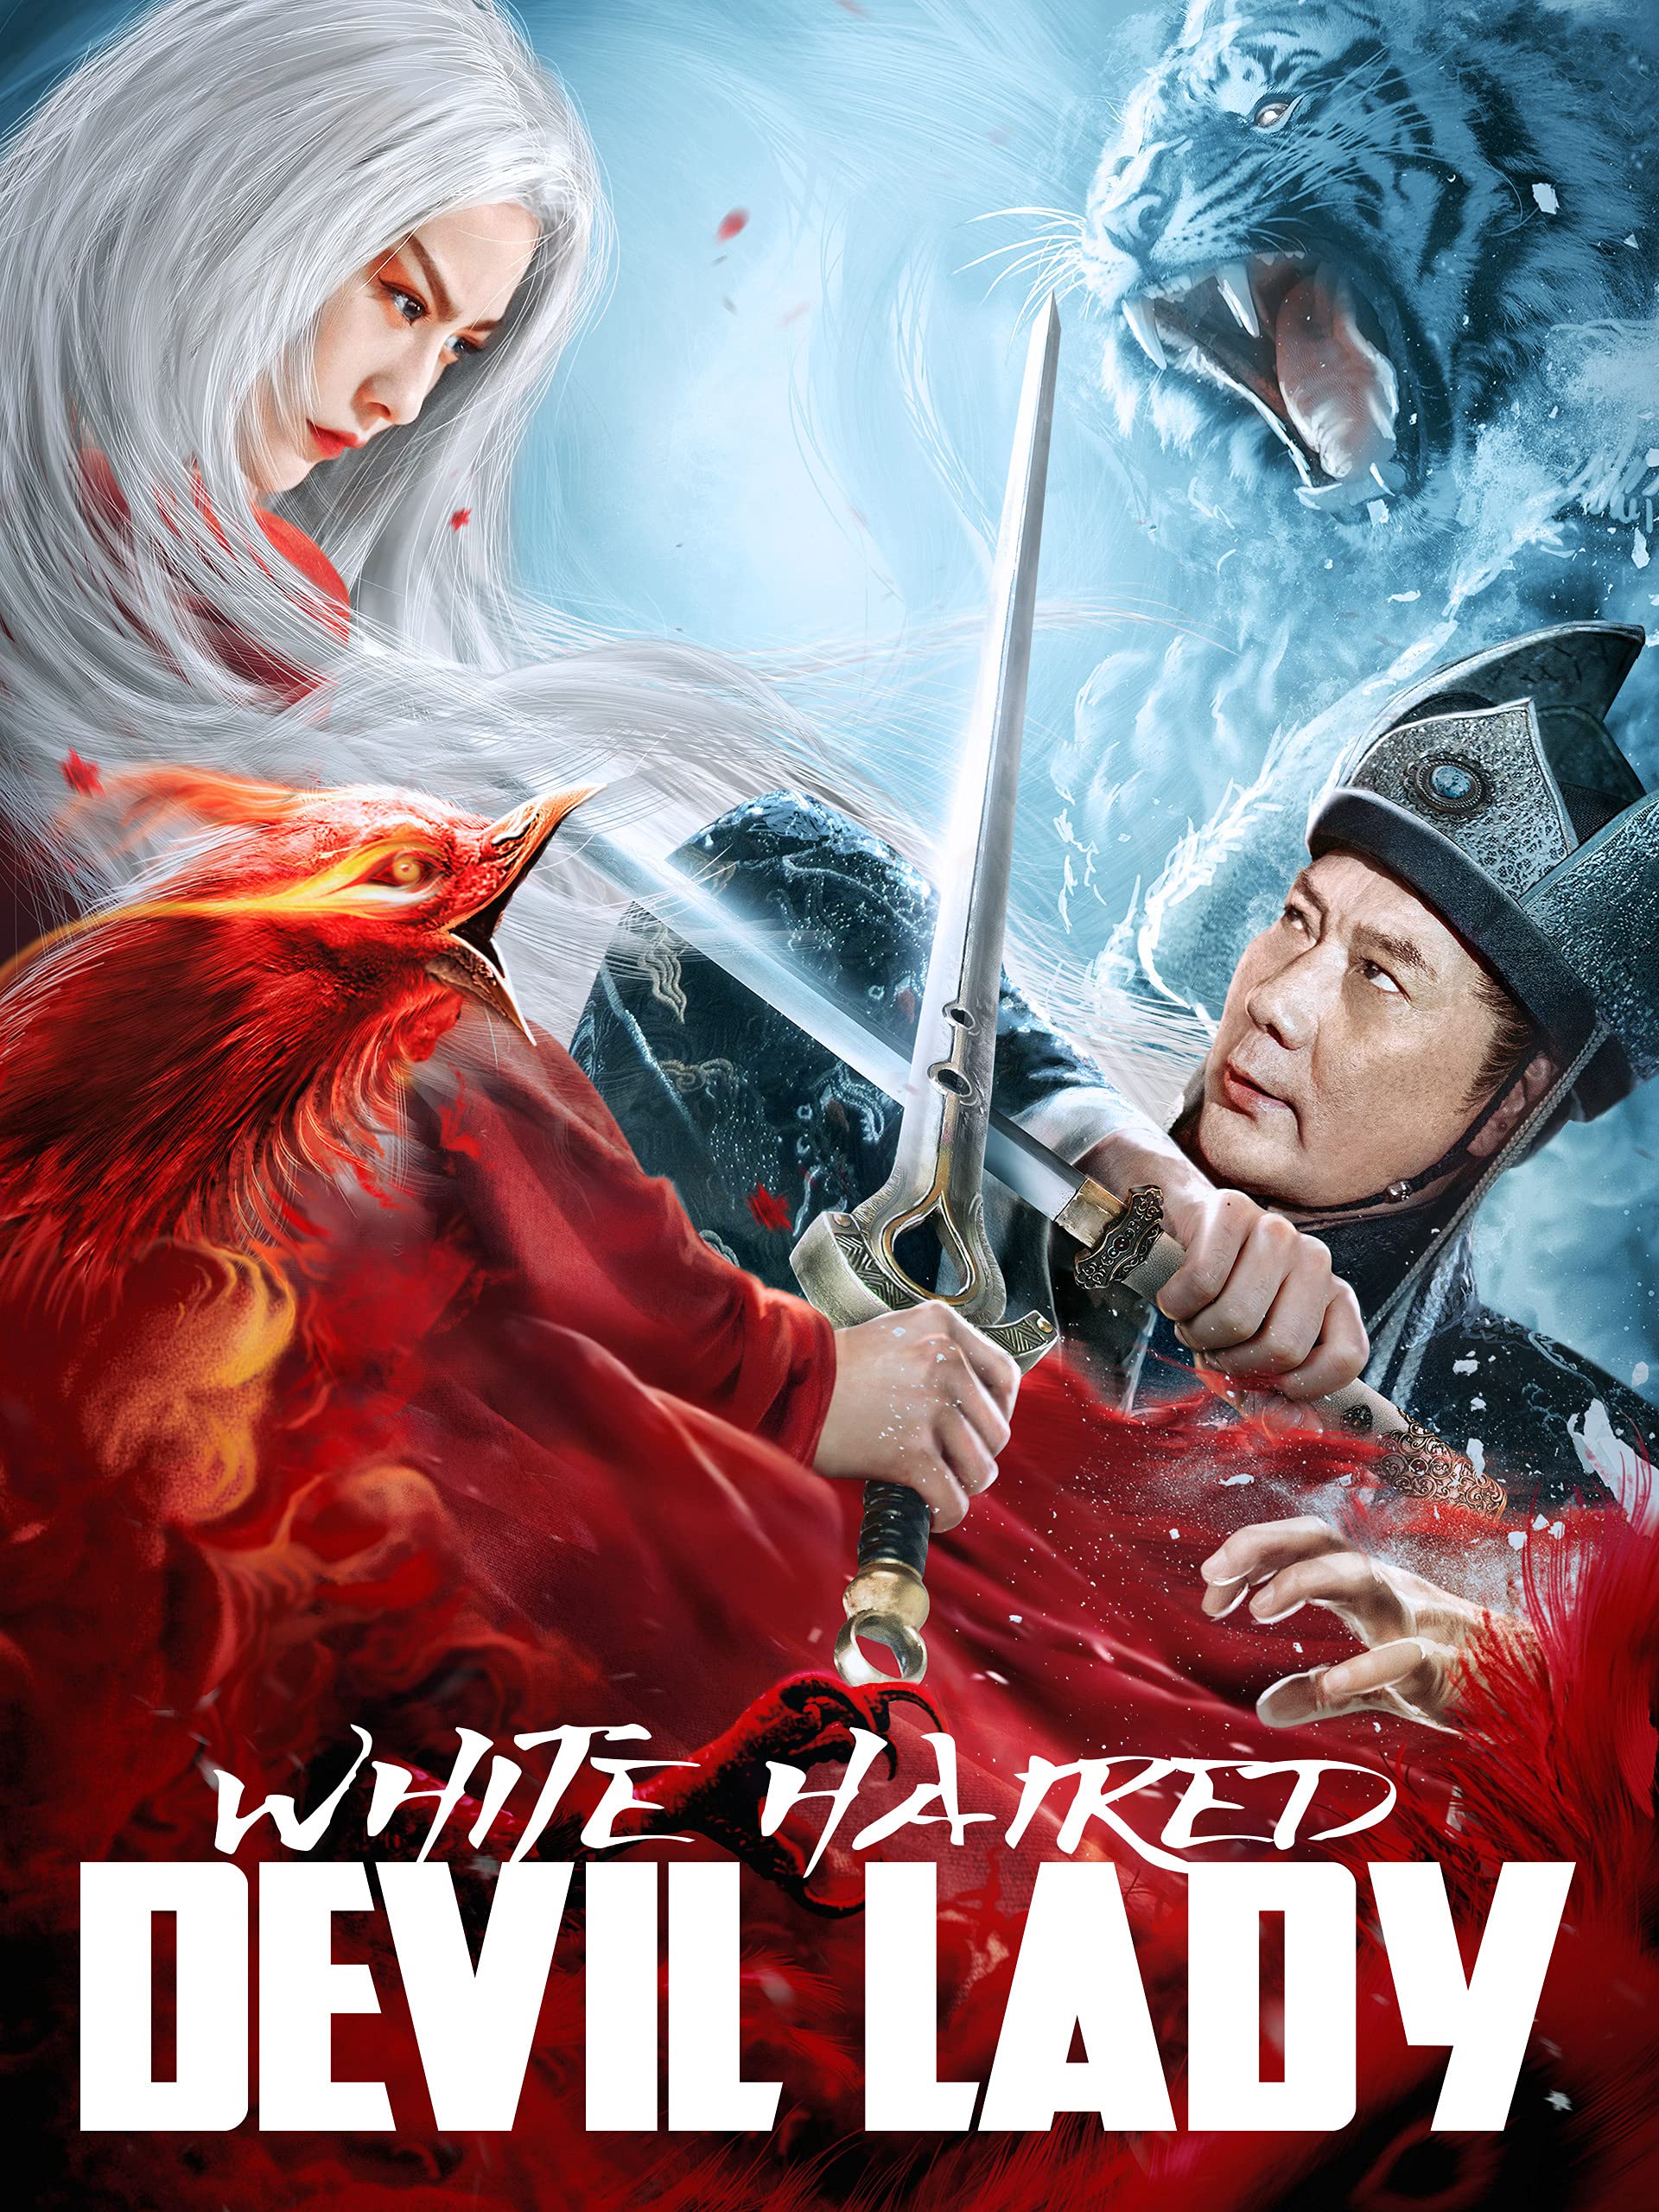 White Haired Devil Lady 2020 ORG Hindi Dual Audio 720p HDRip 950MB Download